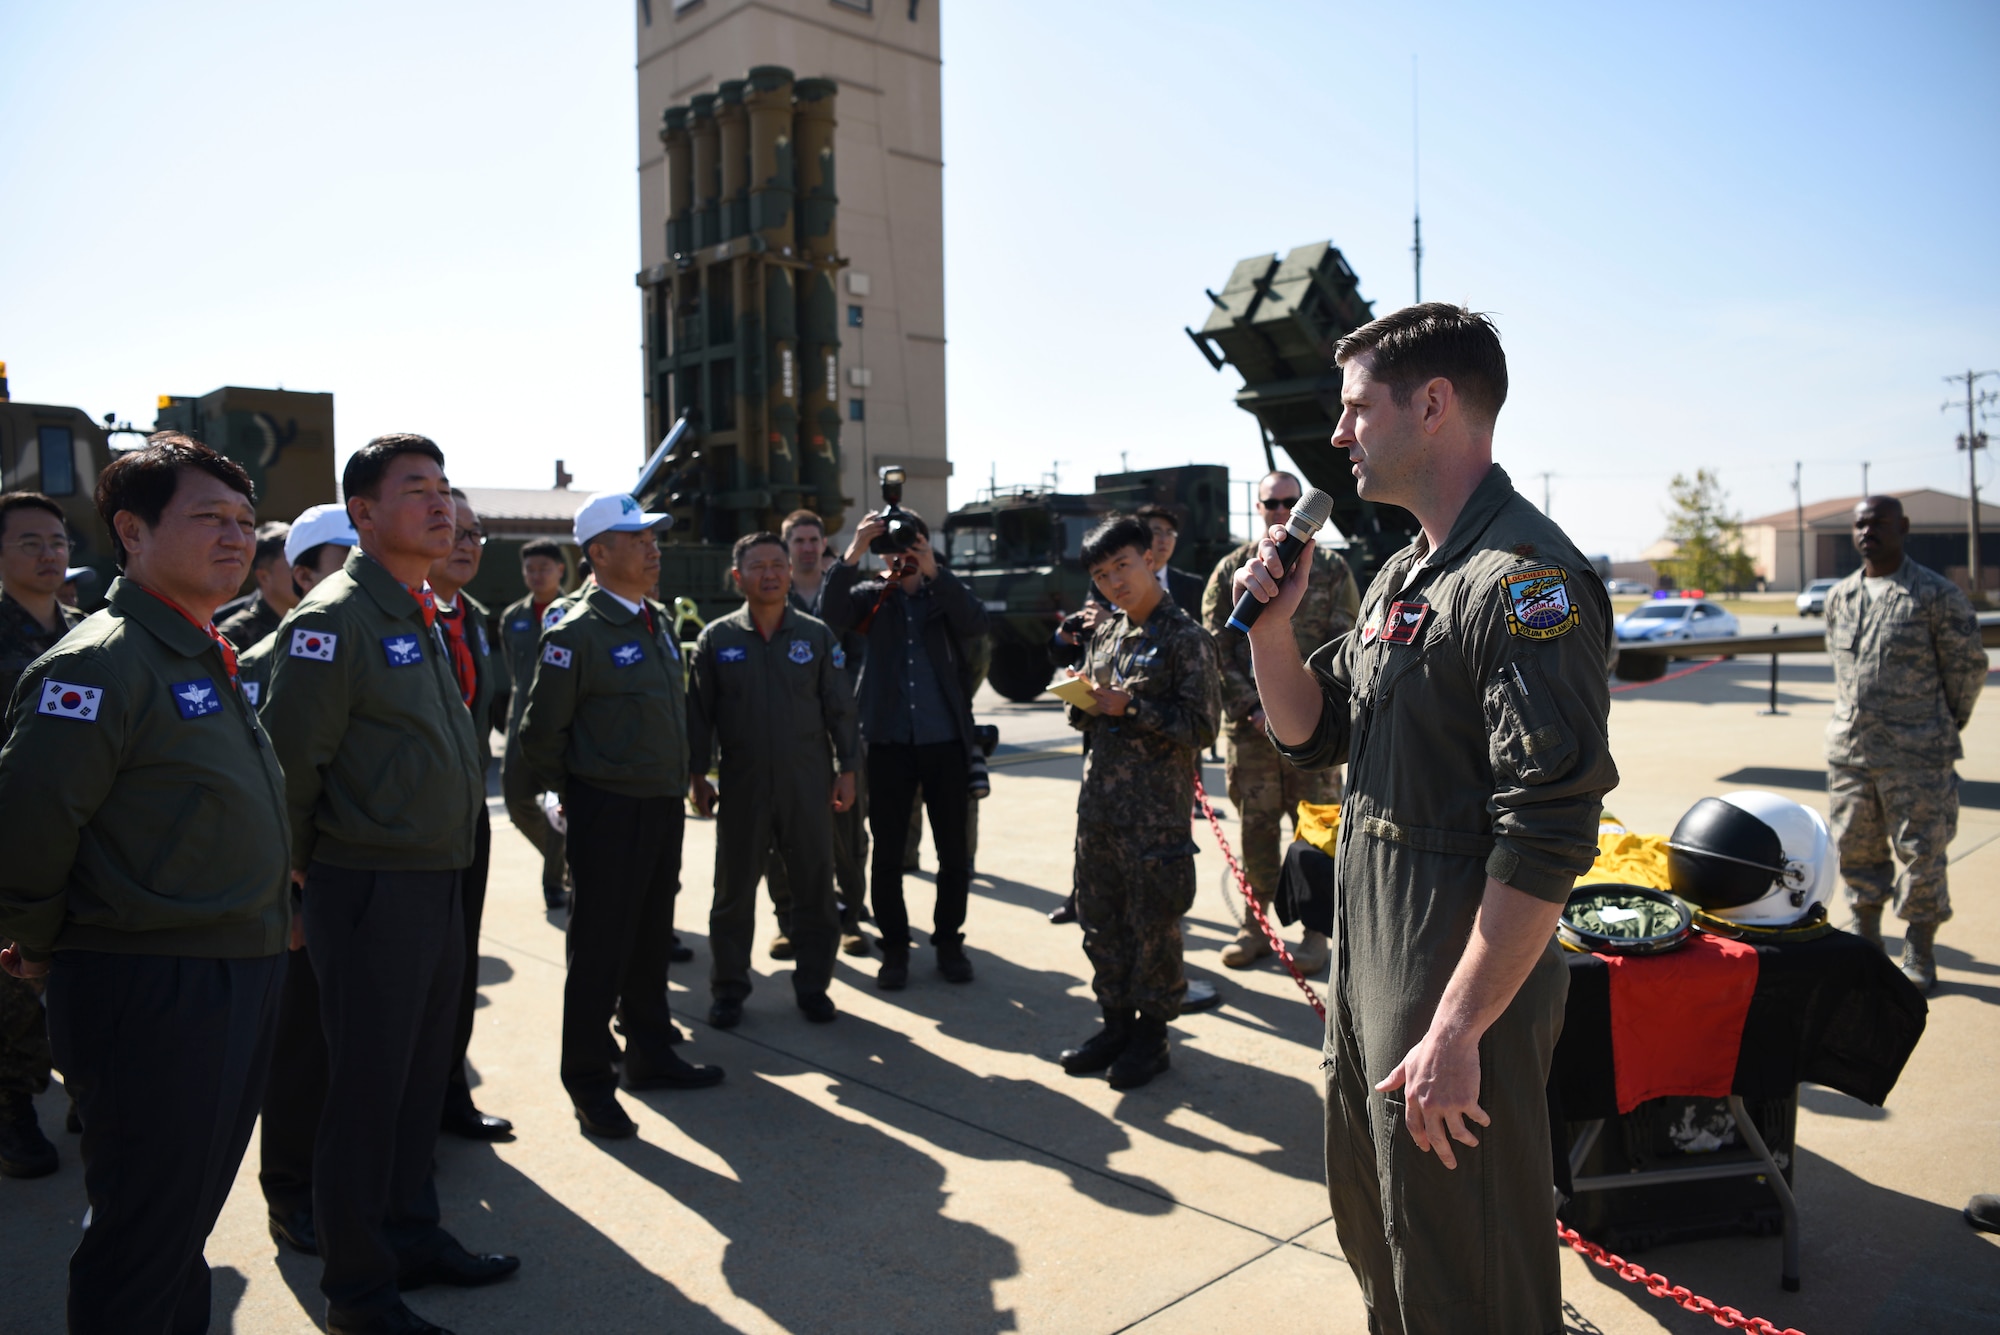 U.S. Air Force Maj. Andrew Behm, a U-2 Dragon Lady pilot assigned to the 5th Reconnaissance Squadron at Osan Air Base, Republic of Korea, speaks to members of the ROK National Defense Committee during a site visit Oct. 25, 2018. The visiting delegation heard from U.S. and ROK pilots and gained a better understanding of the strong working relationship between the two countries. (U.S. Air Force photo by Airman 1st Class Ilyana A. Escalona)